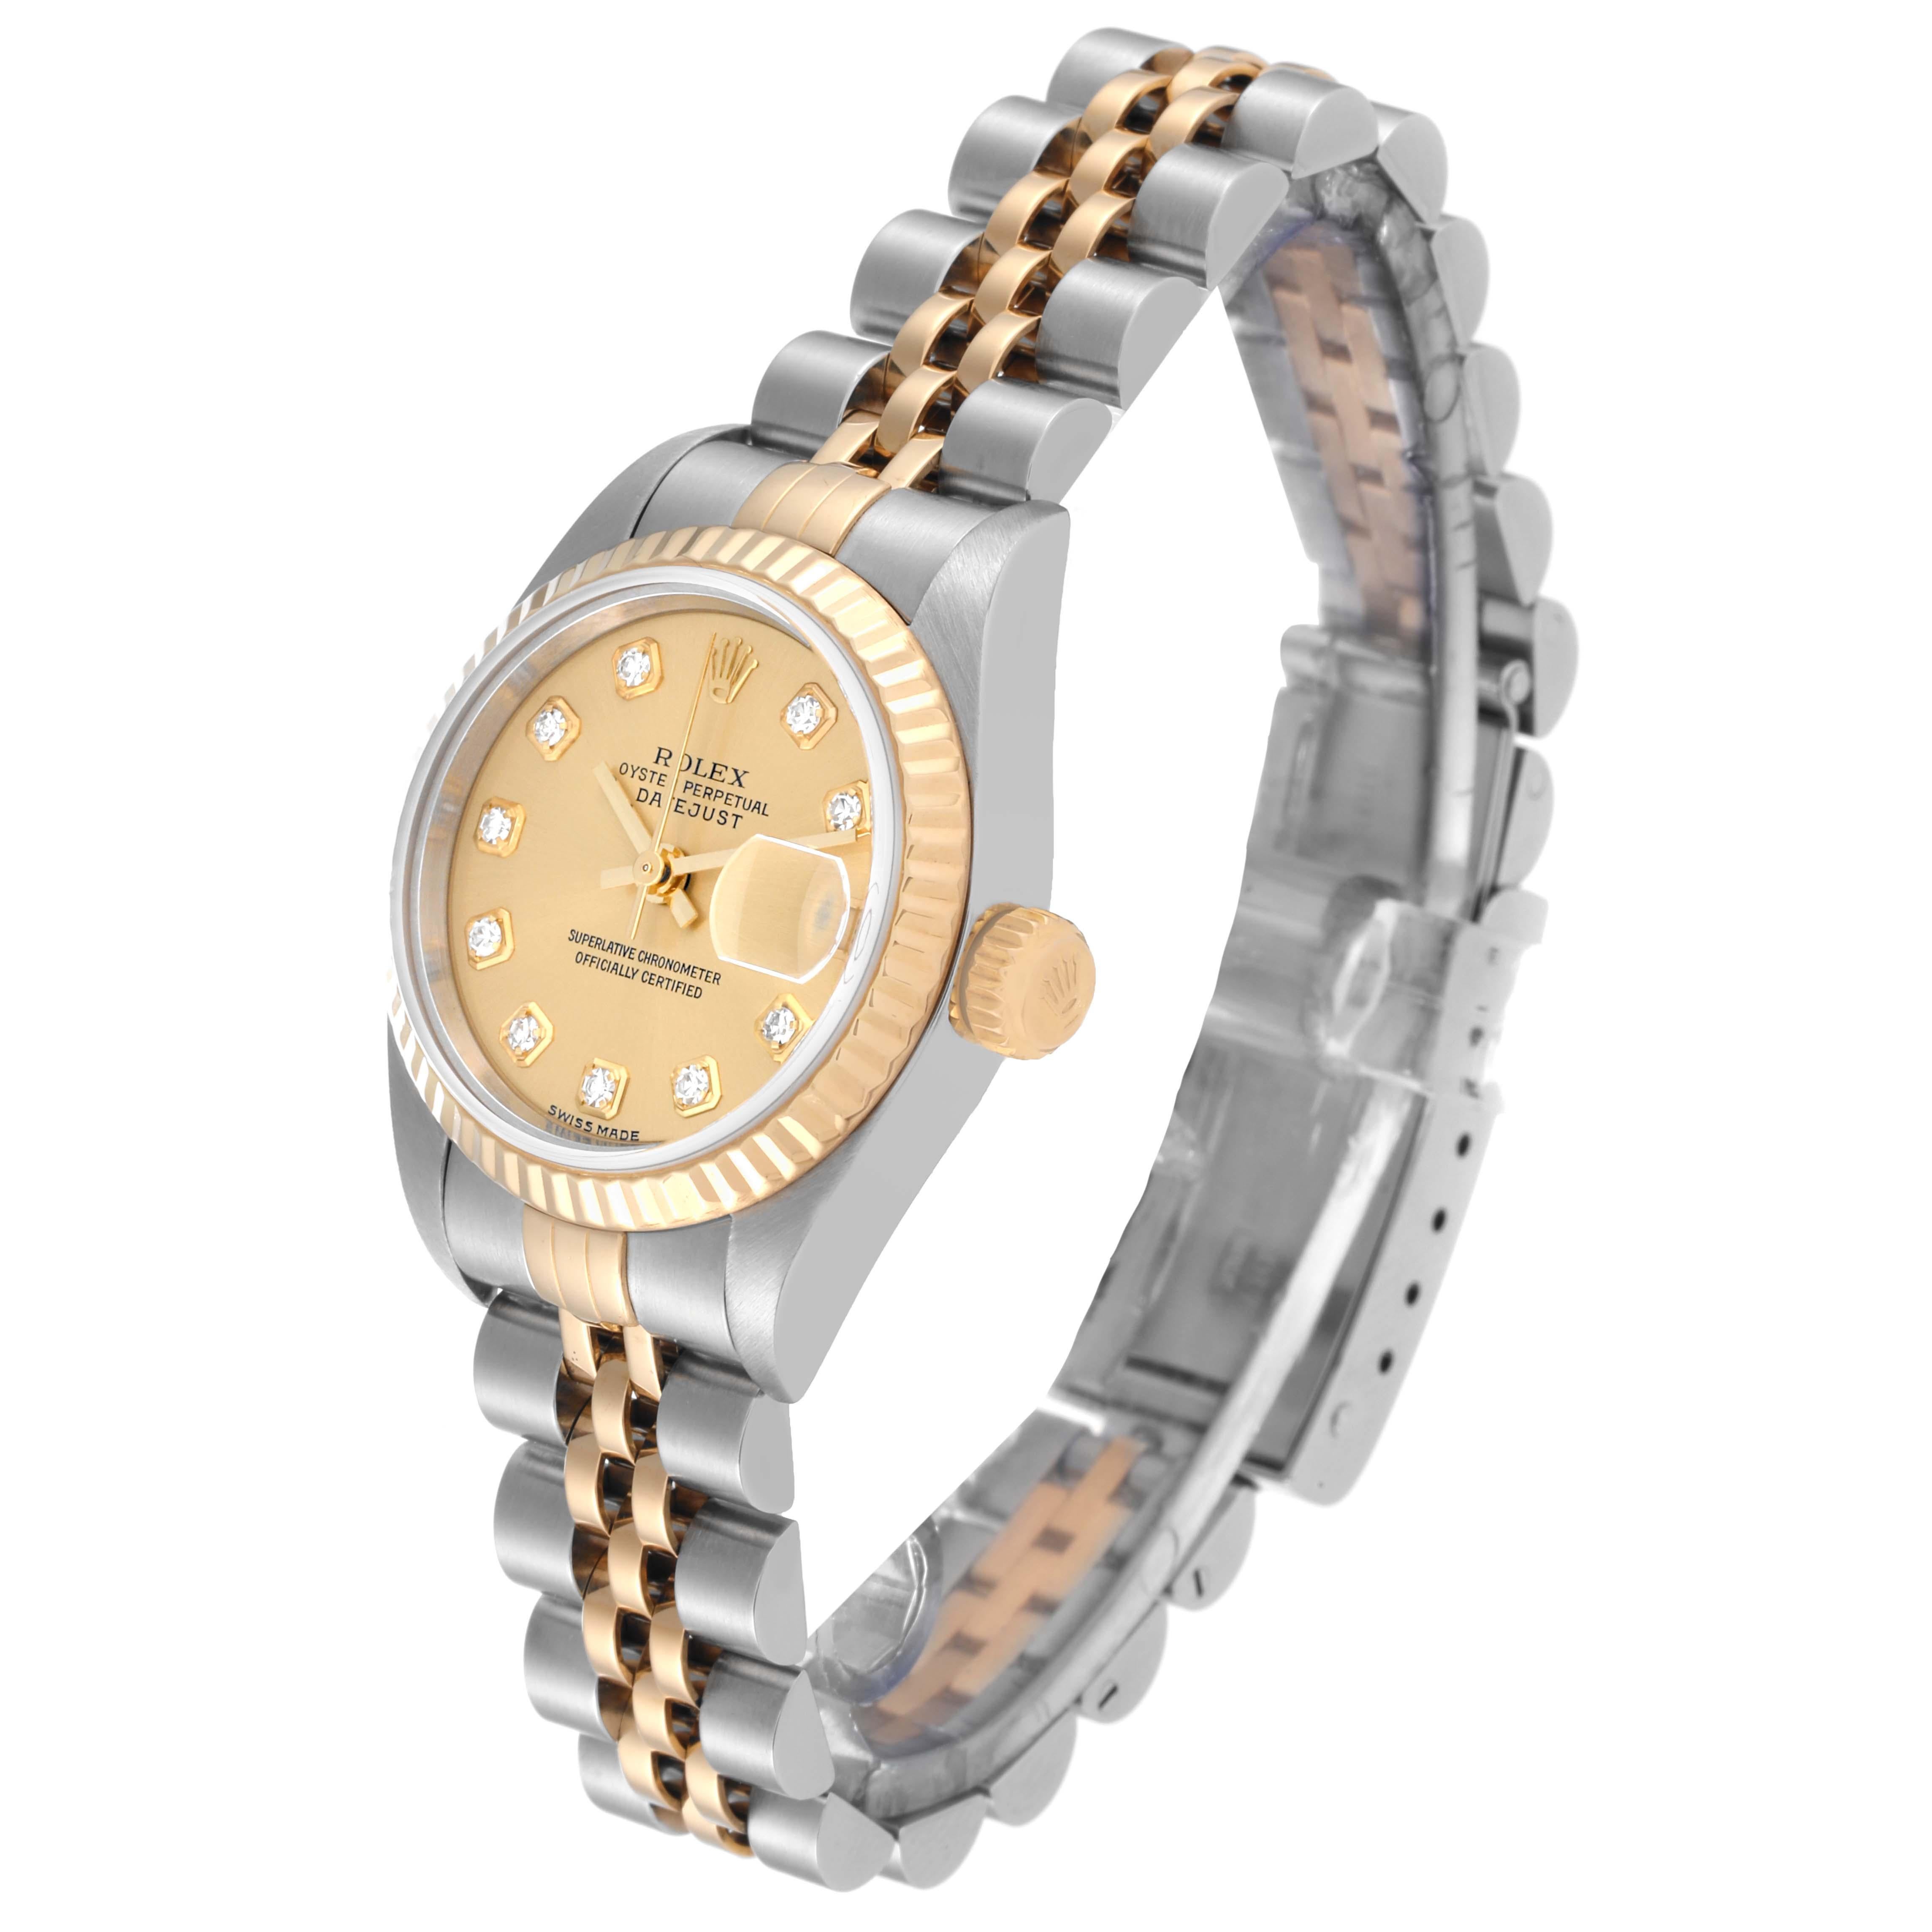 Rolex Datejust Steel Yellow Gold Champagne Diamond Dial Ladies Watch 79173 For Sale 3